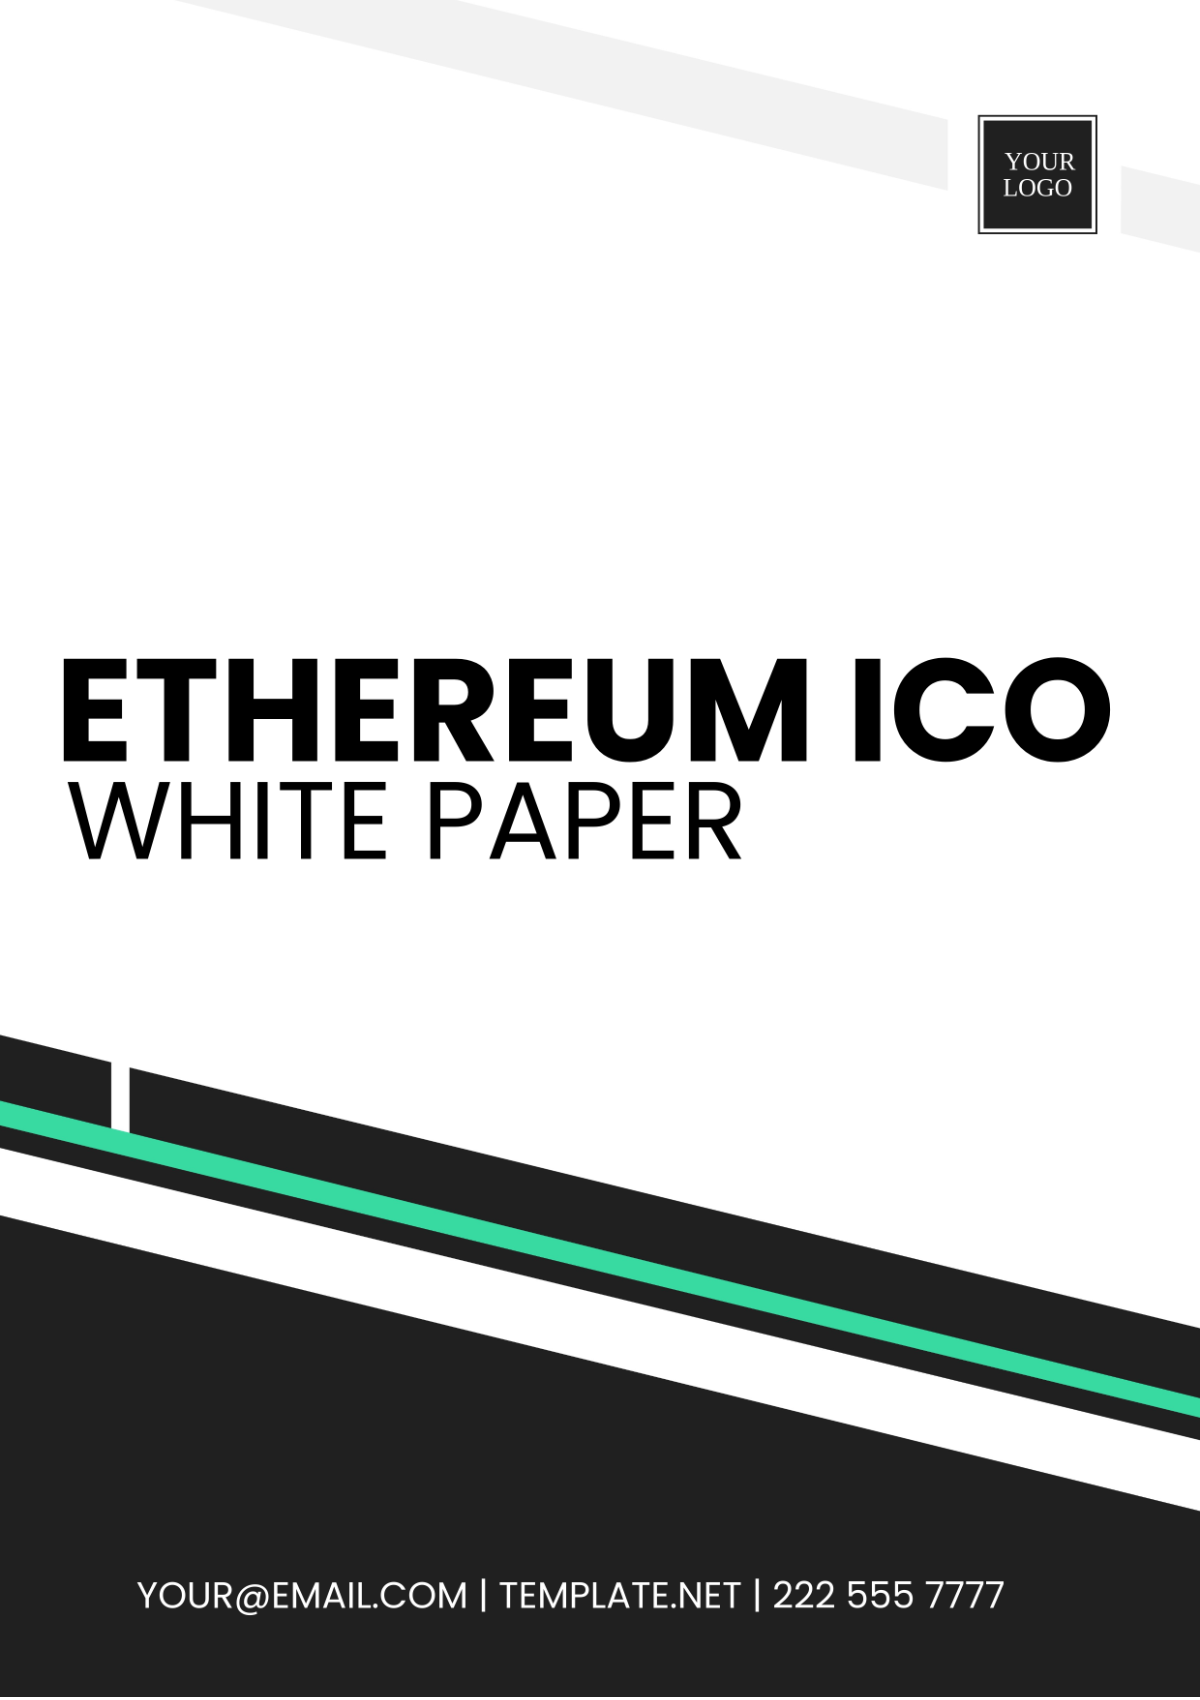 Free Ethereum ICO White Paper Template